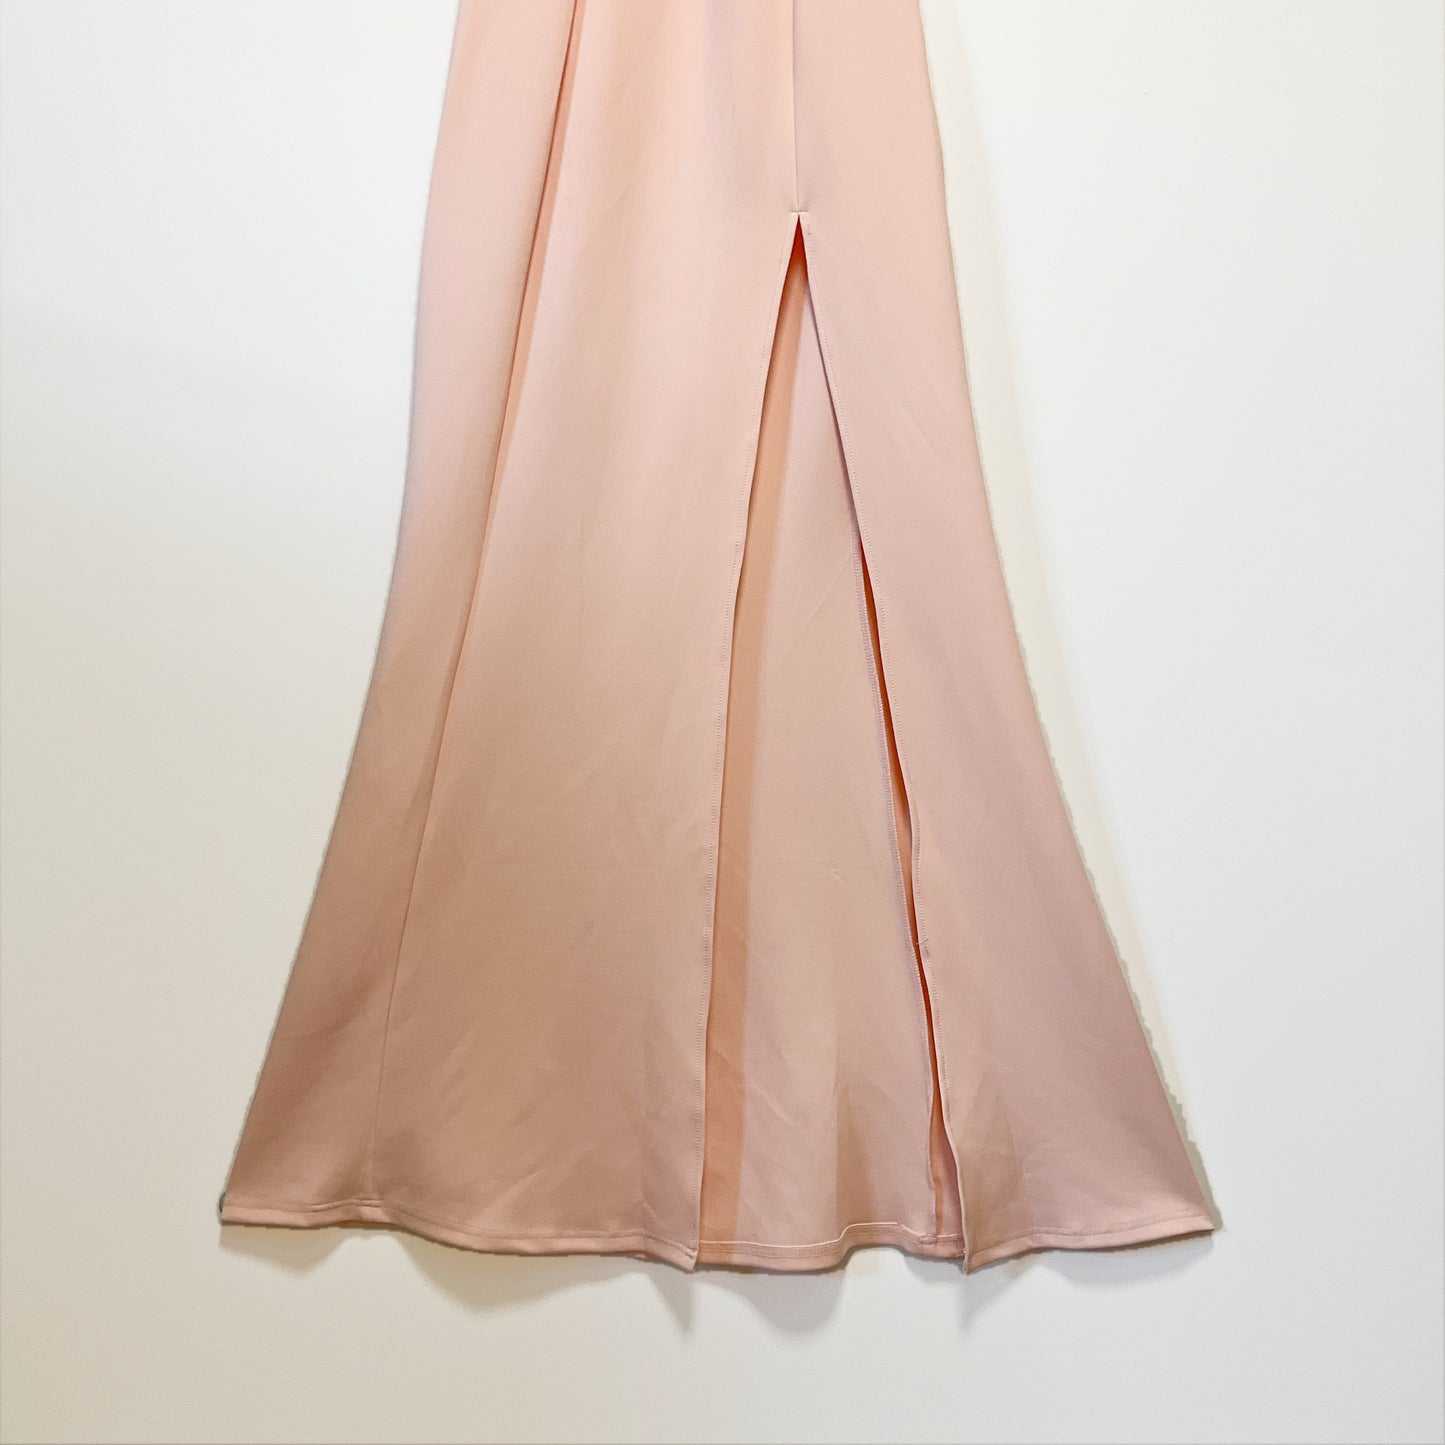 Showpo - Once For The Money Dress In Blush